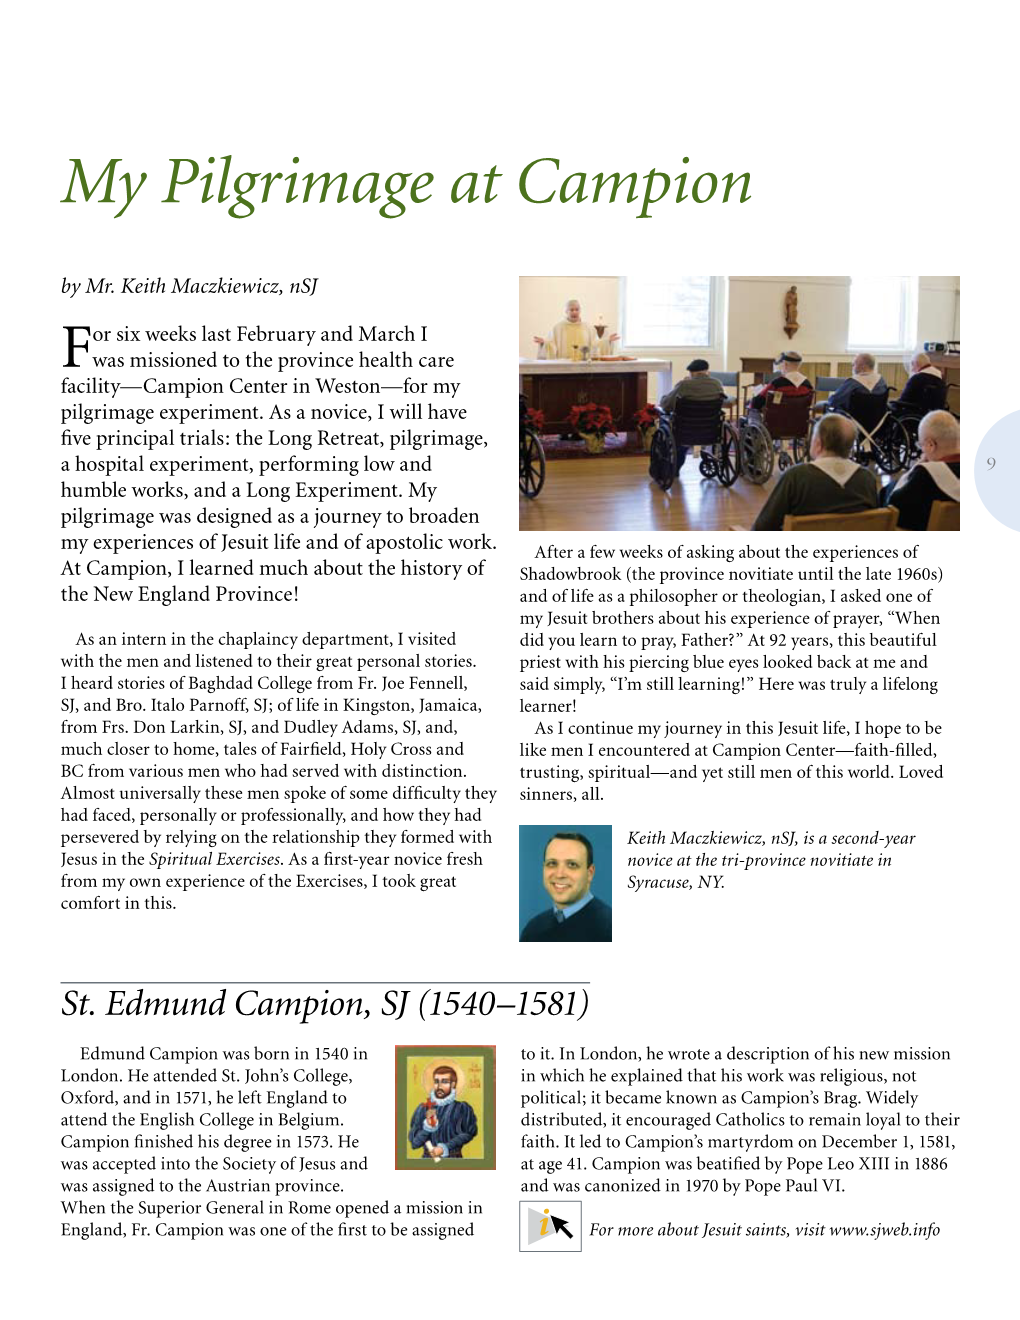 My Pilgrimage at Campion by Mr